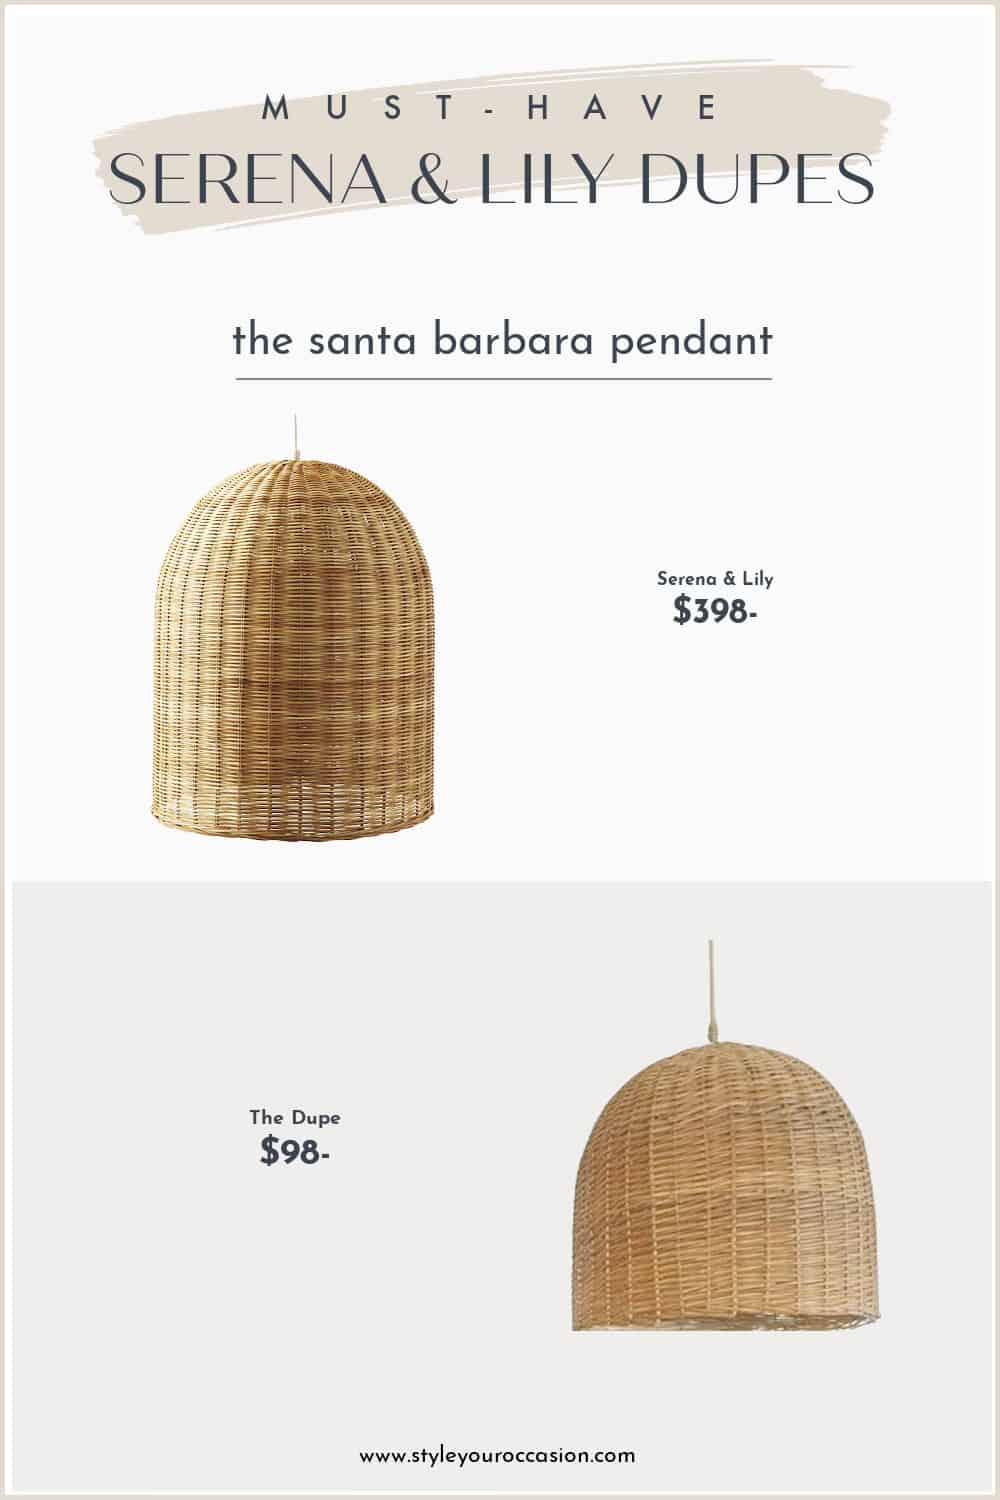 image comparing two natural rattan pendant lights, one Serena and Lily dupe and the original pendant